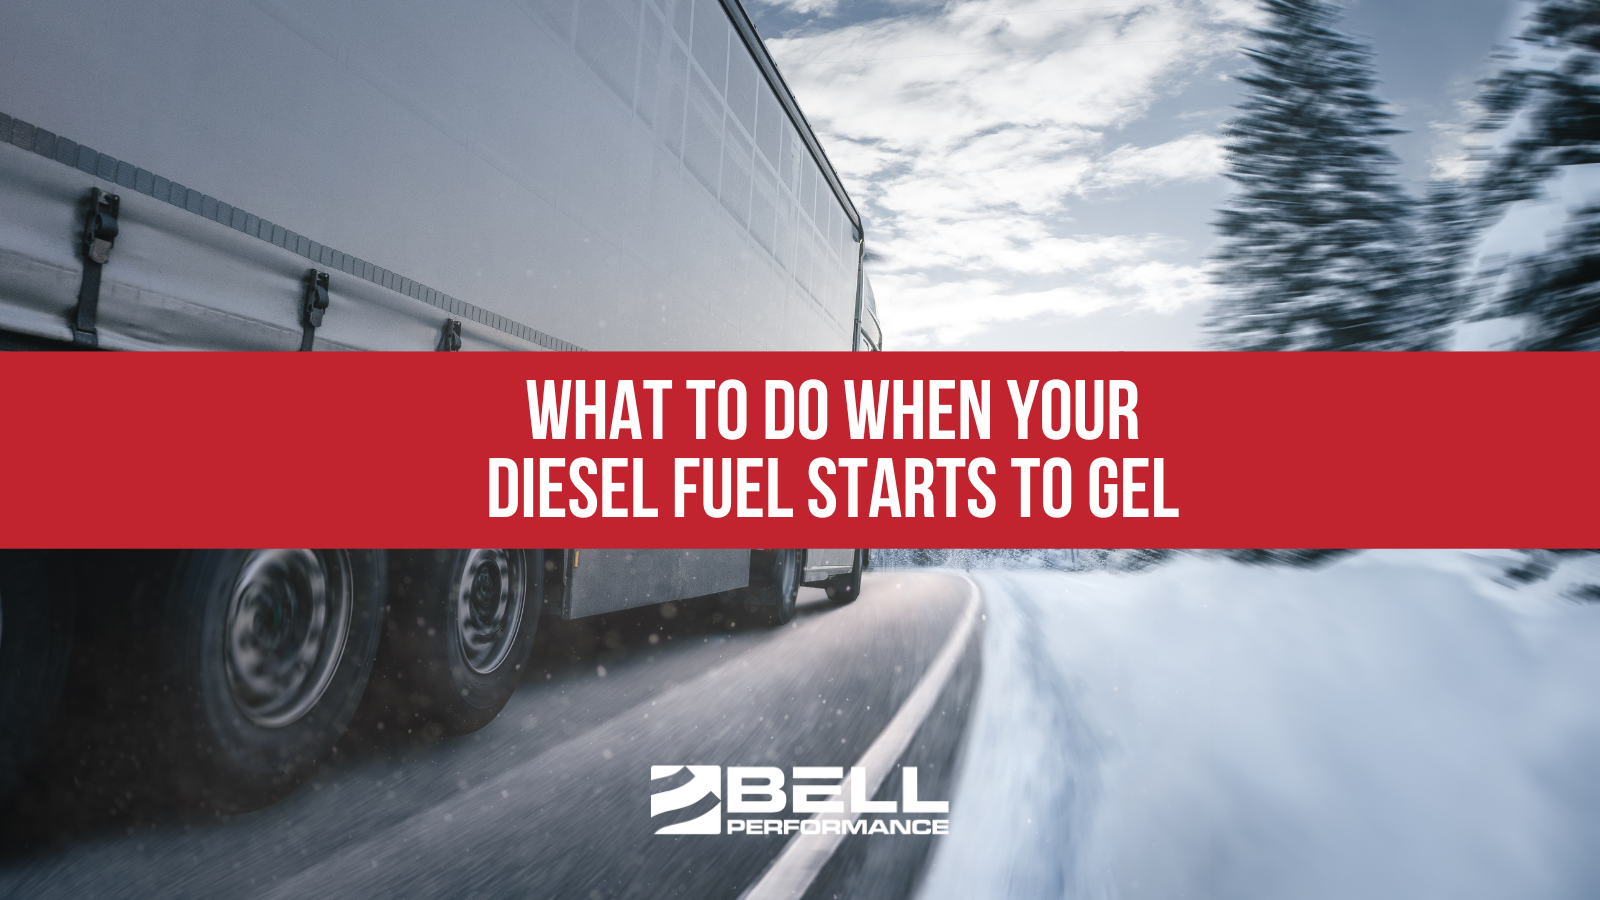 What to do When Your Diesel Fuel Starts to Gel